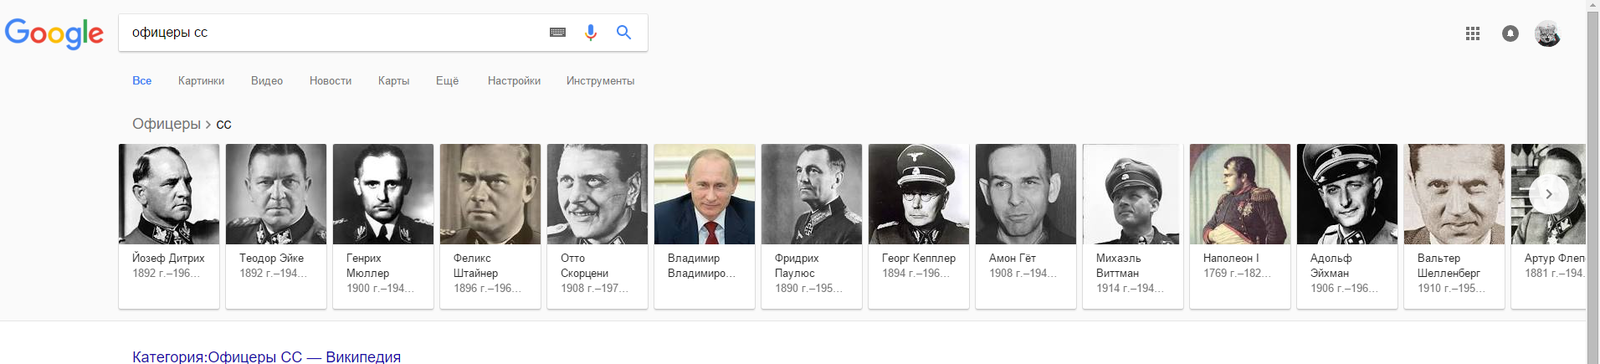 Google knows everything... - Search queries, Vladimir Putin, SS troops, Officers